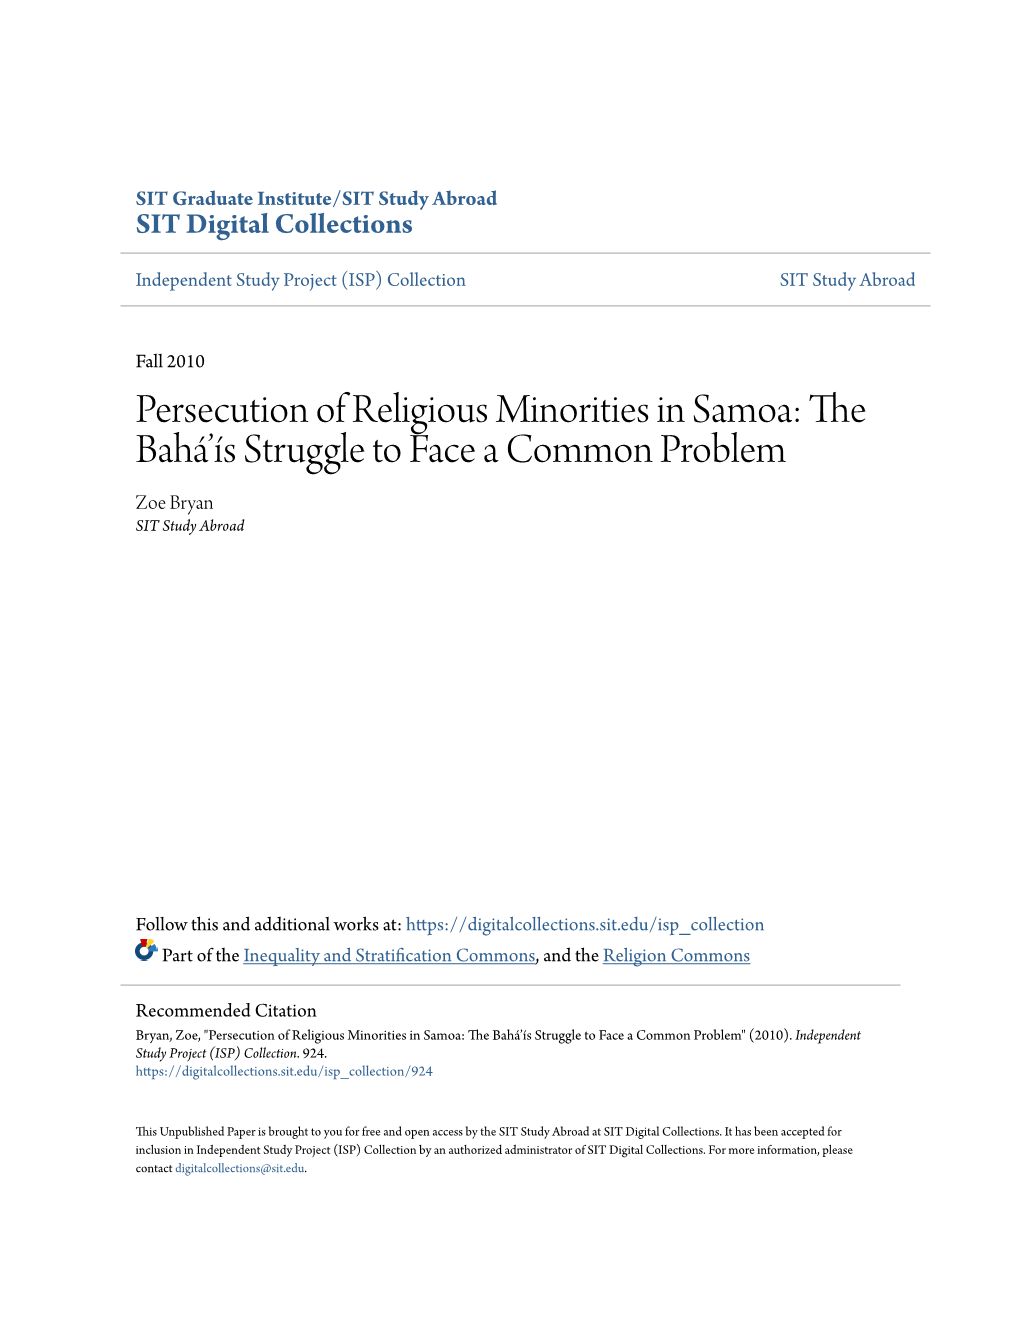 Persecution of Religious Minorities in Samoa: the Bahá’Ís Struggle to Face a Common Problem Zoe Bryan SIT Study Abroad